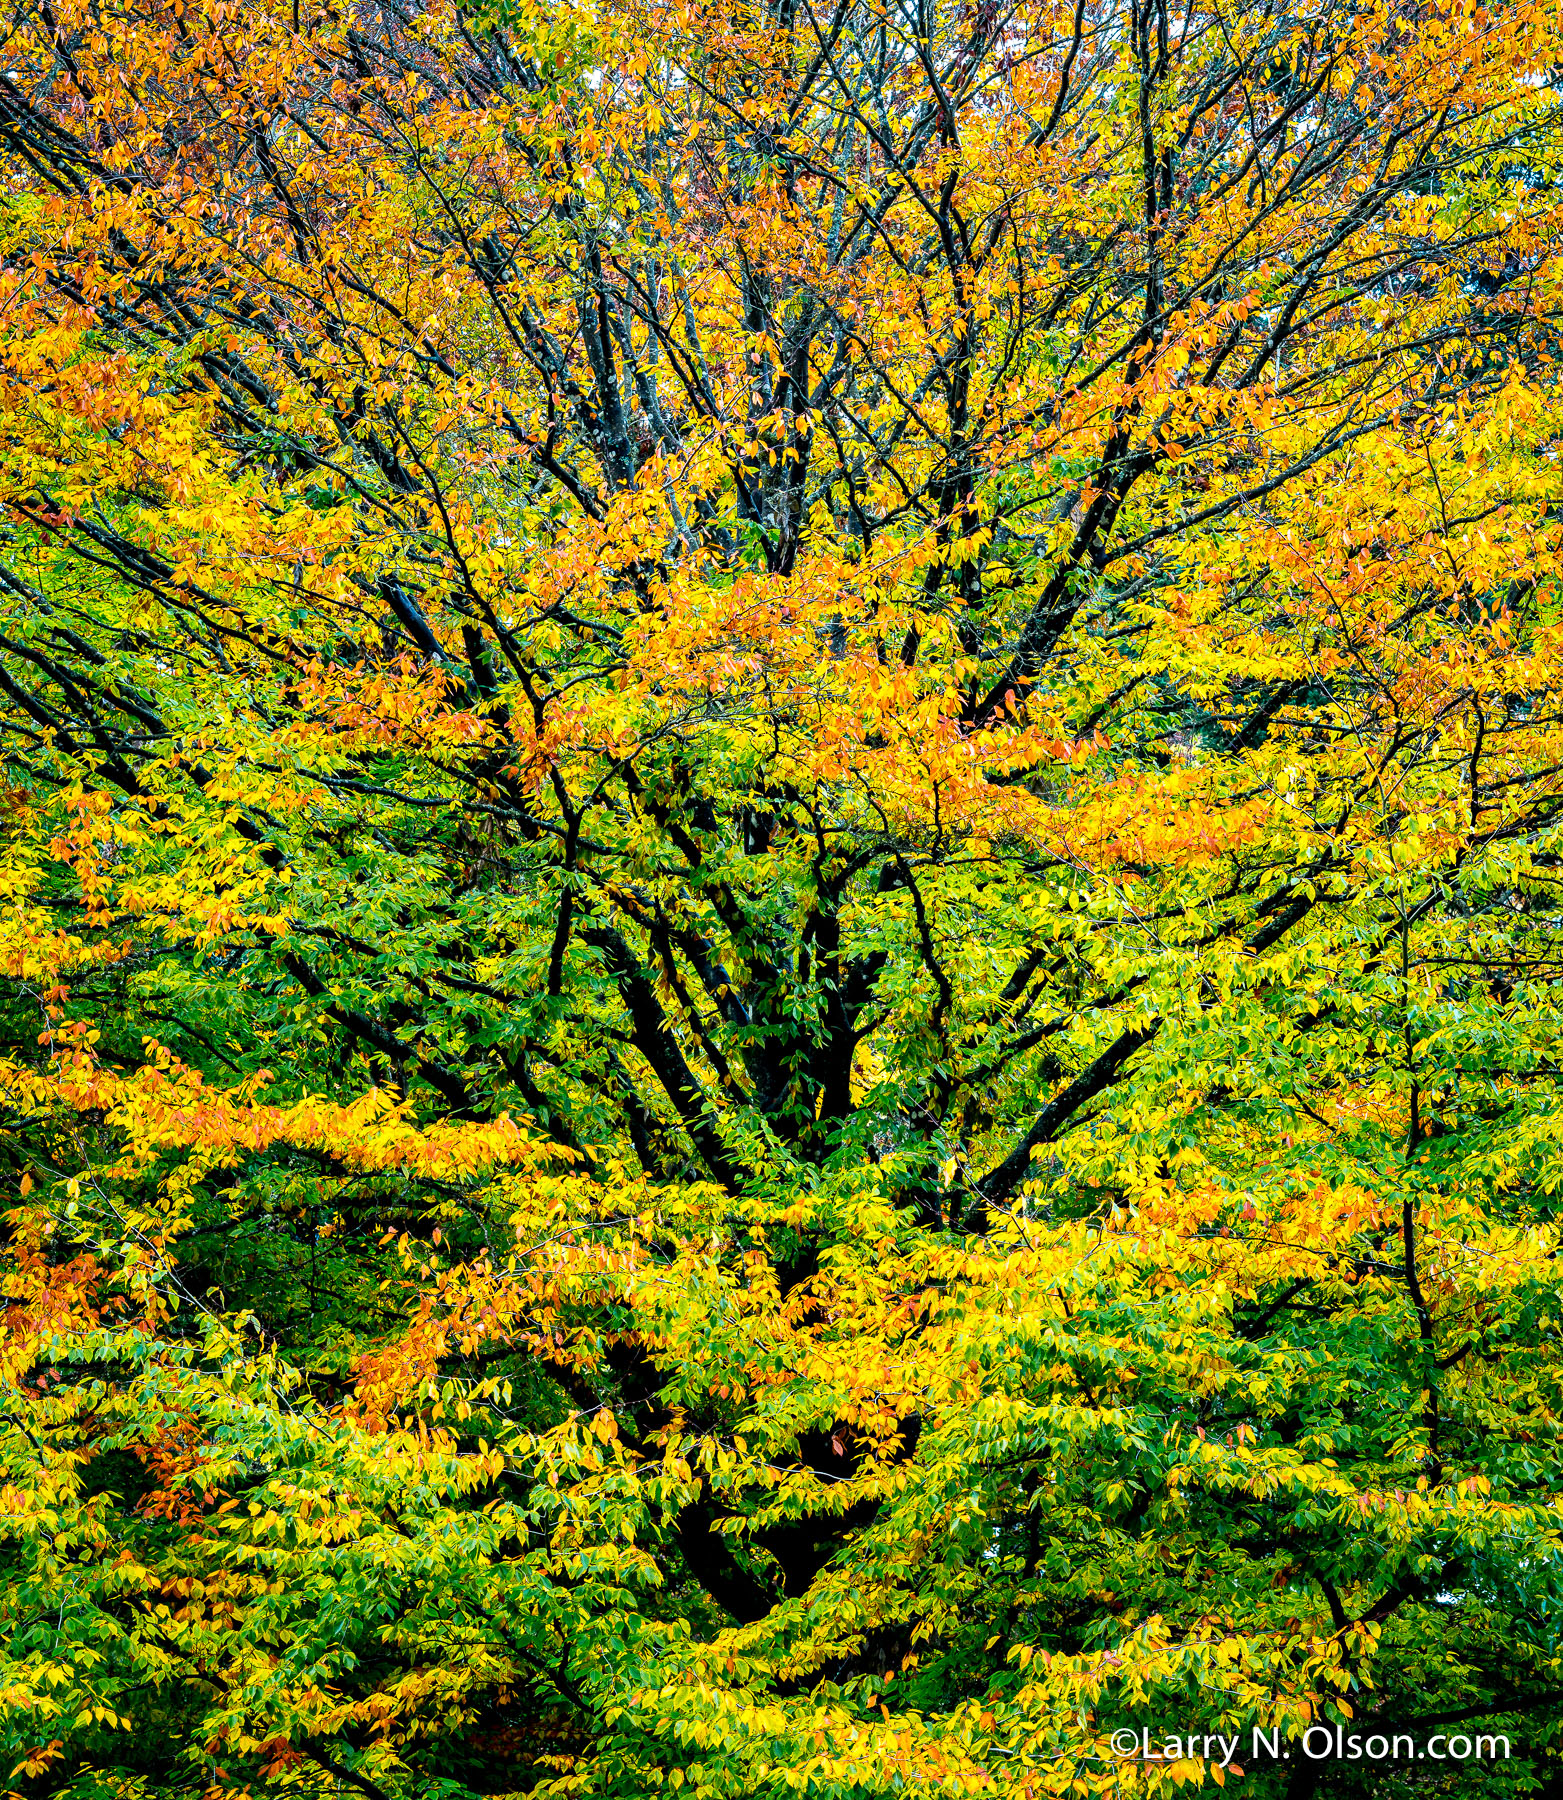 Beech Trees, Hoyt Arboretum, OR | A riot of fall color brightens up the forest at Hoyt Arboretum in Washington Park.